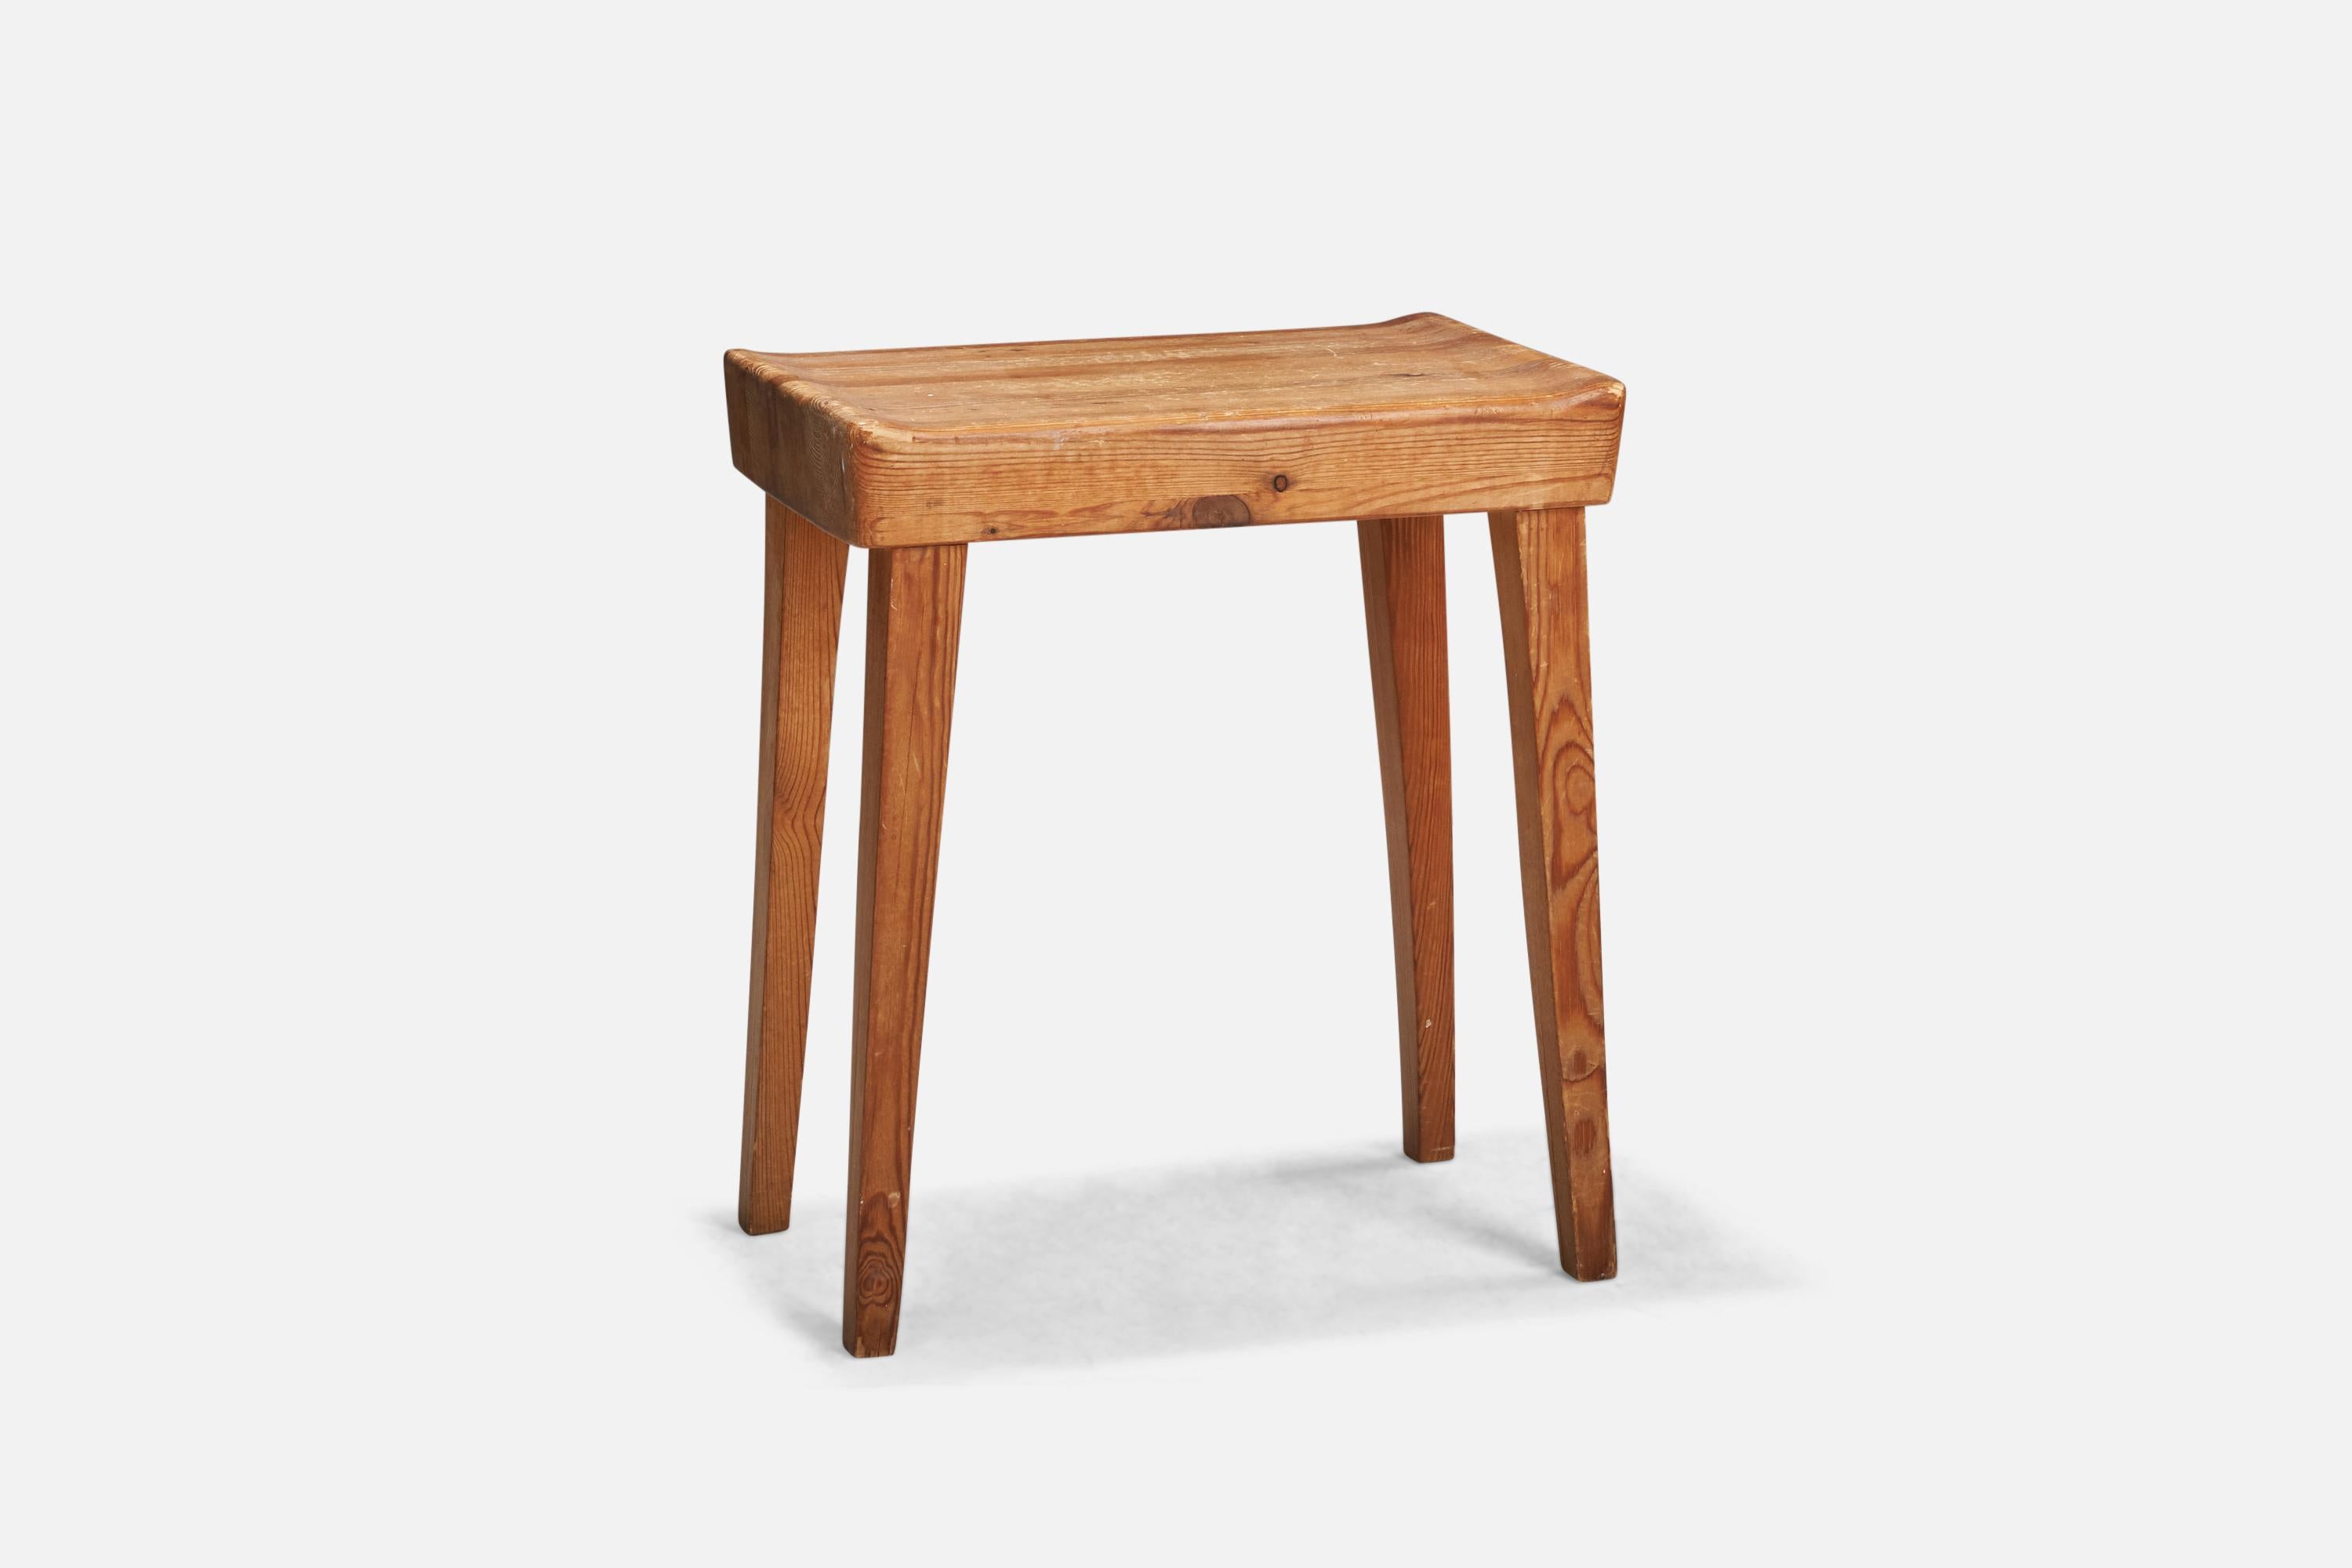 A pine stool designed and produced by a Swedish Designer, Sweden, 1940s.